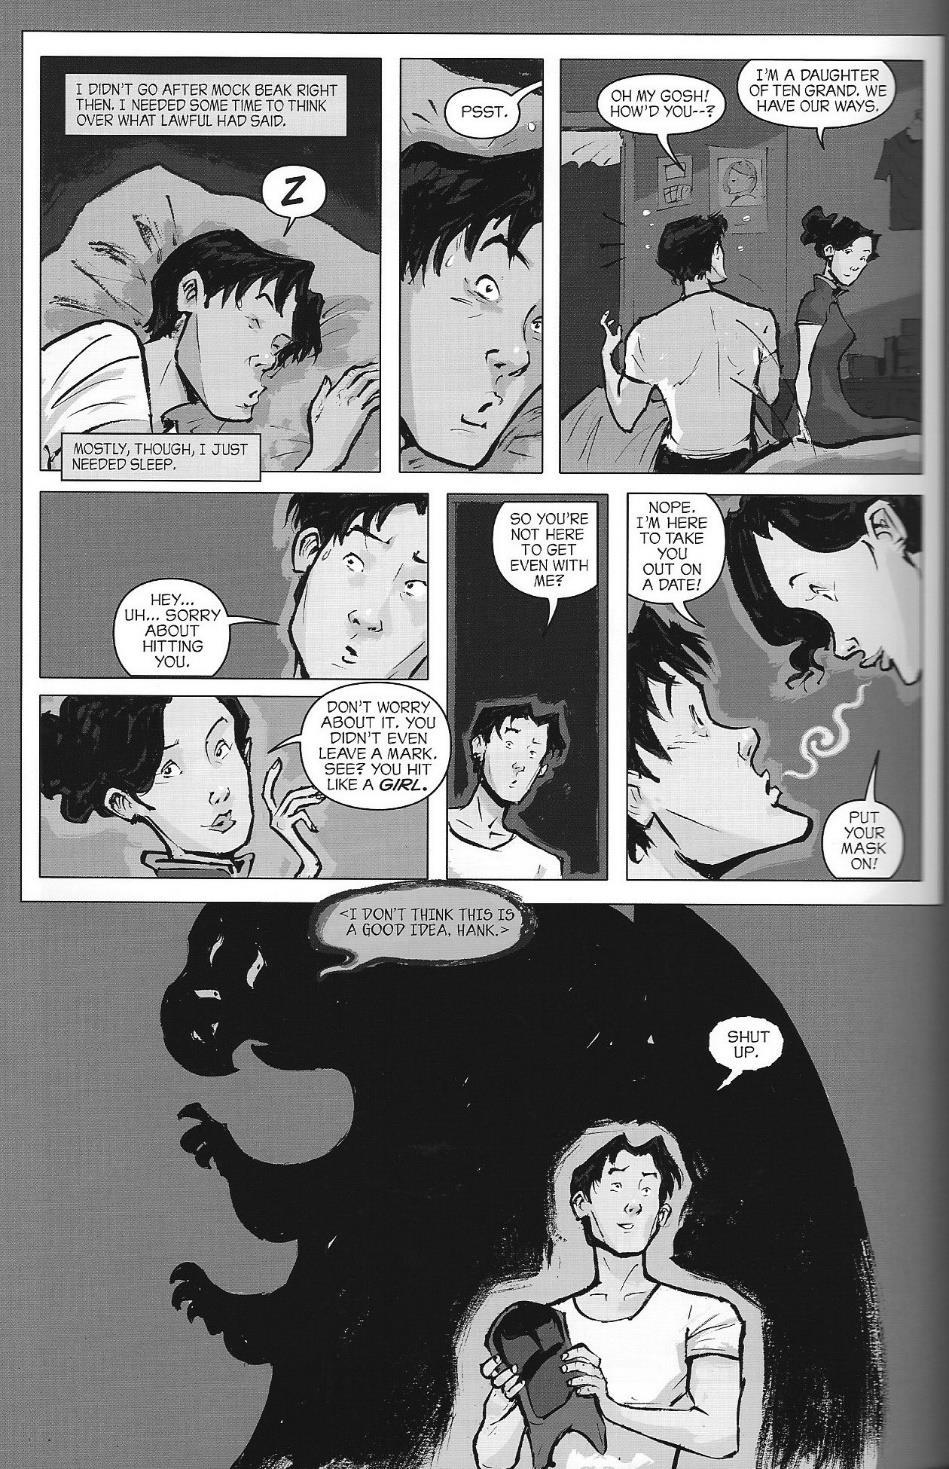 The Language of Comics 1 2 3 4 5 6 From Yang, The Shadow Hero,